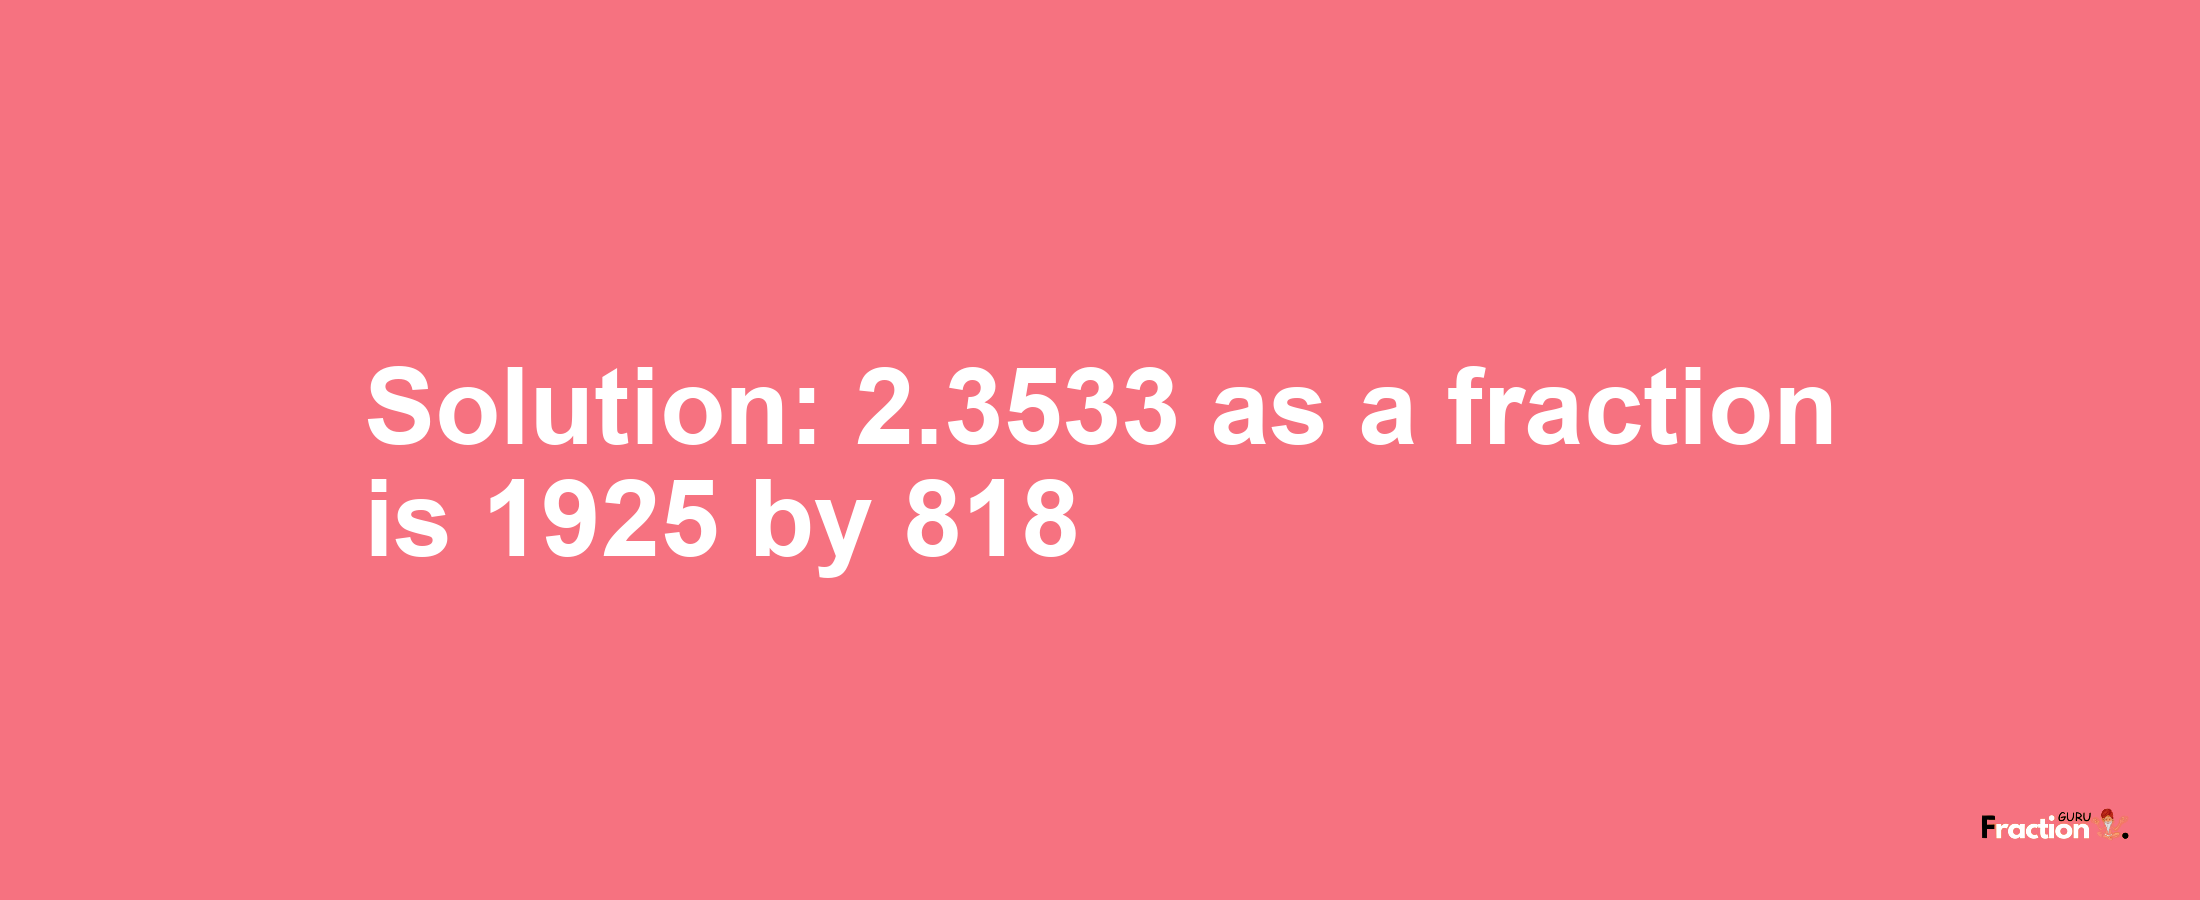 Solution:2.3533 as a fraction is 1925/818